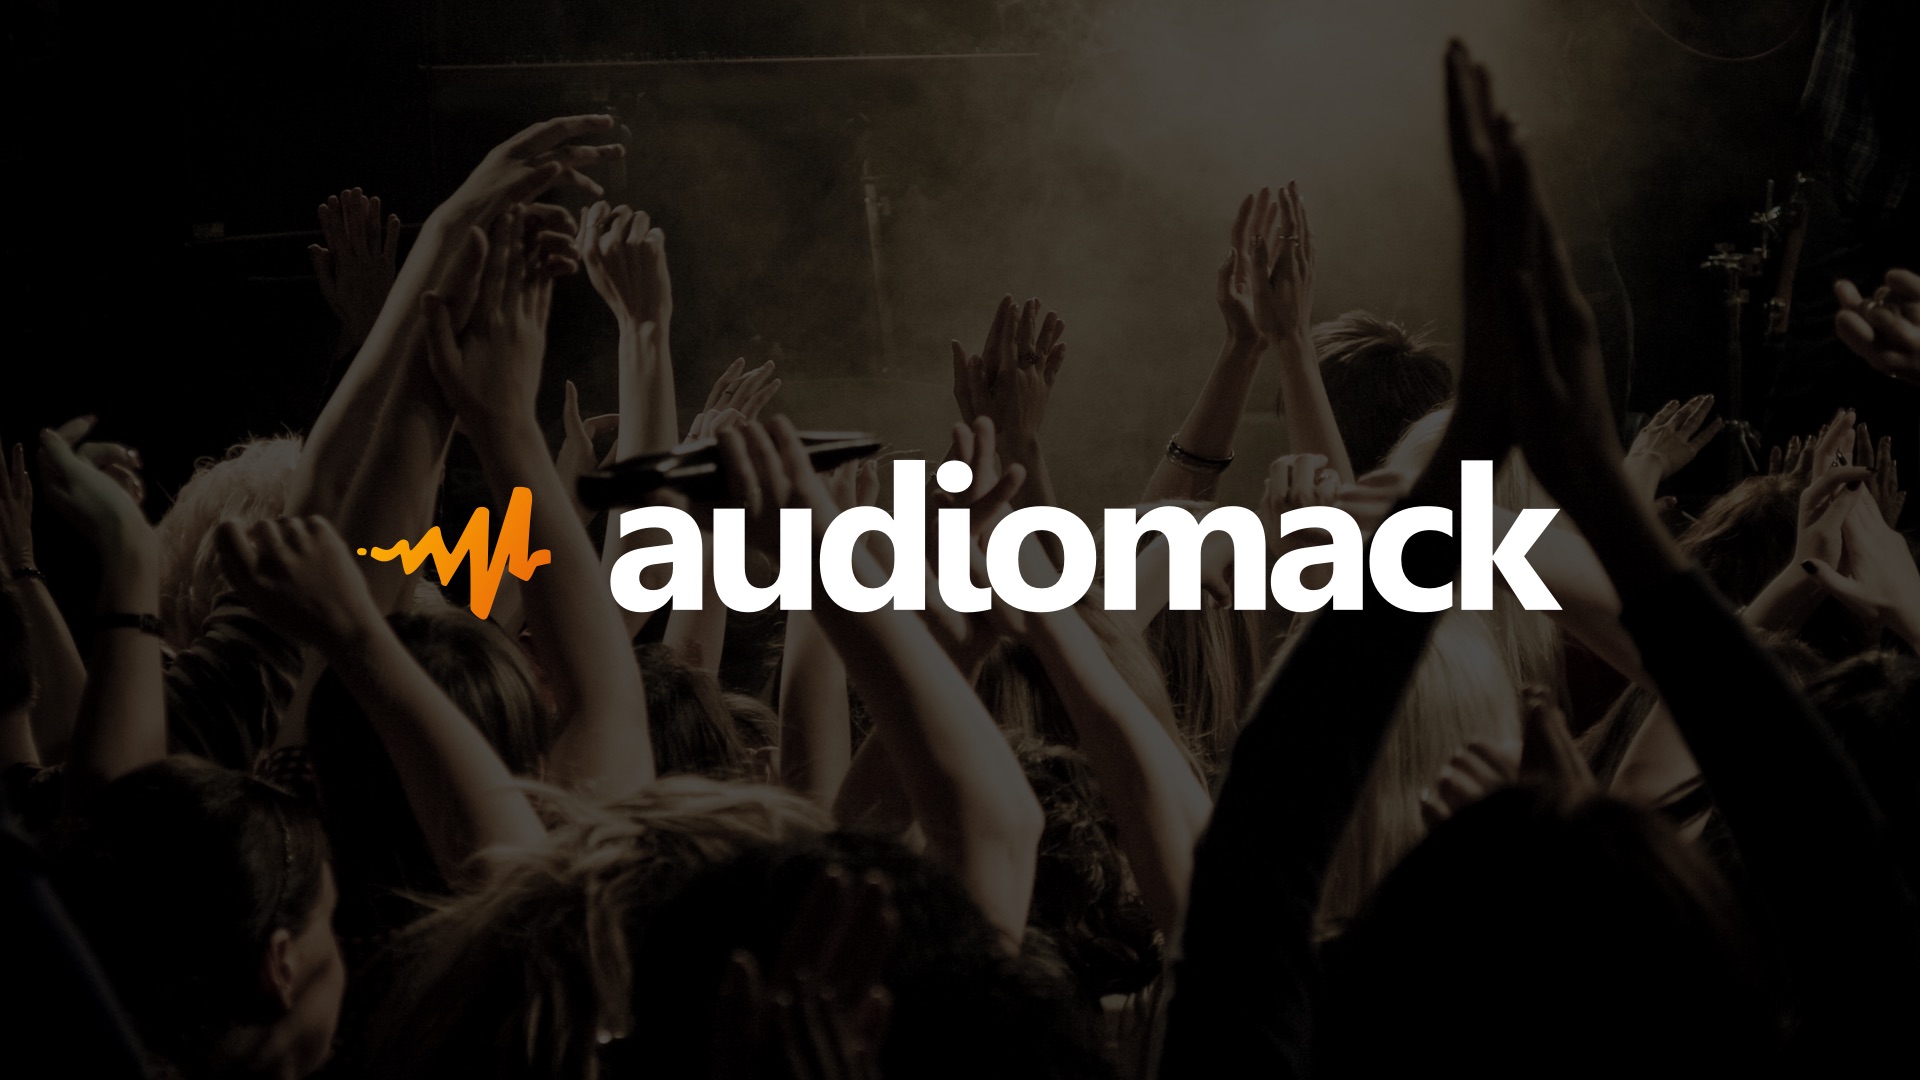 What is Audiomack?